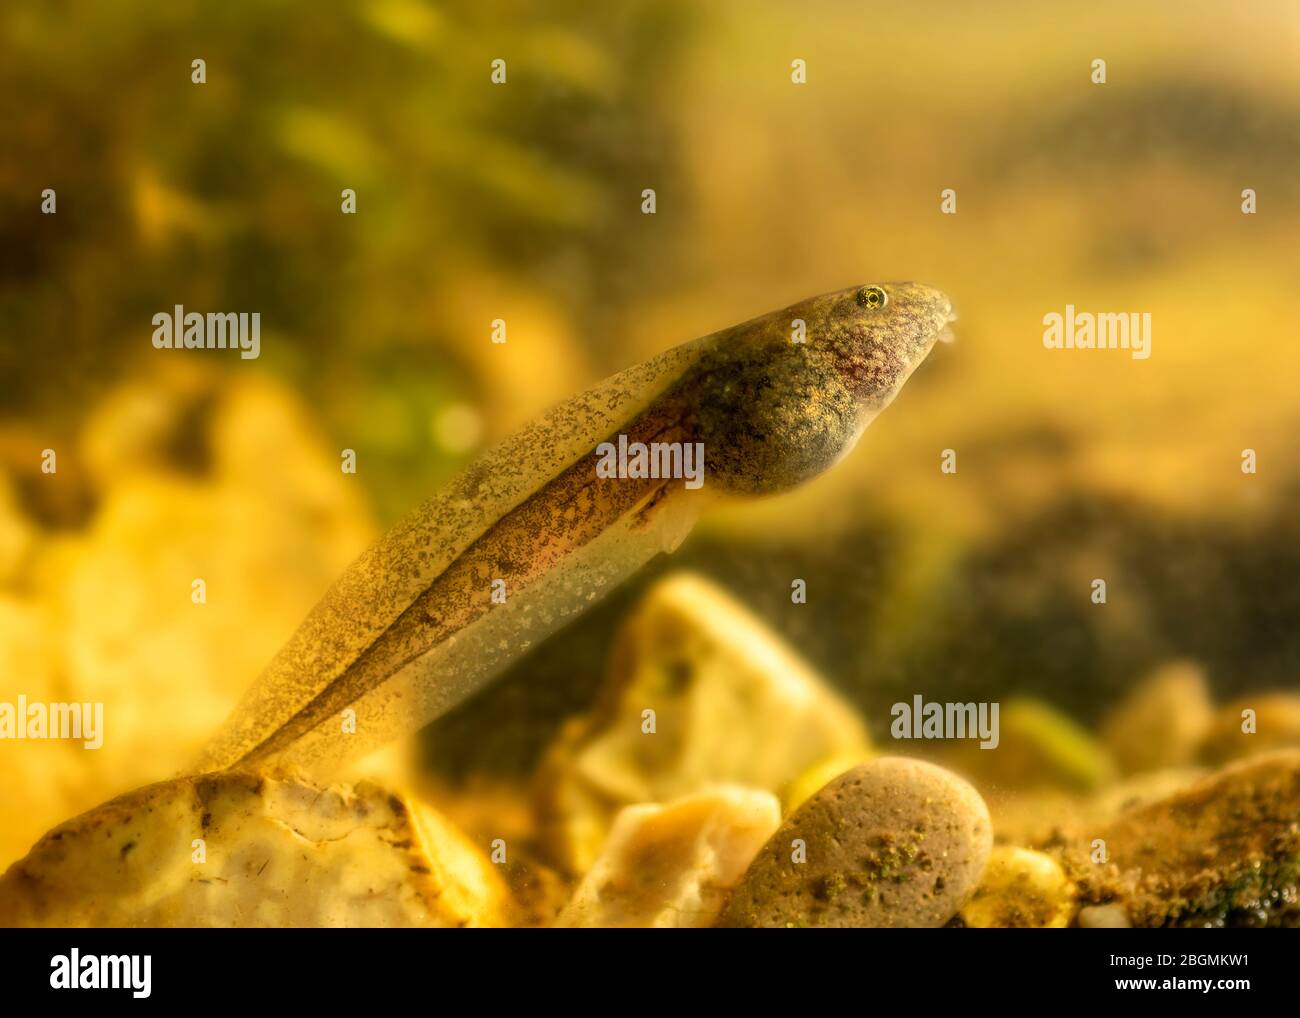 close up and detailed single  colourful  tadpole  swimming upwards showing back legs  , clean background for copy space or text overlay Stock Photo